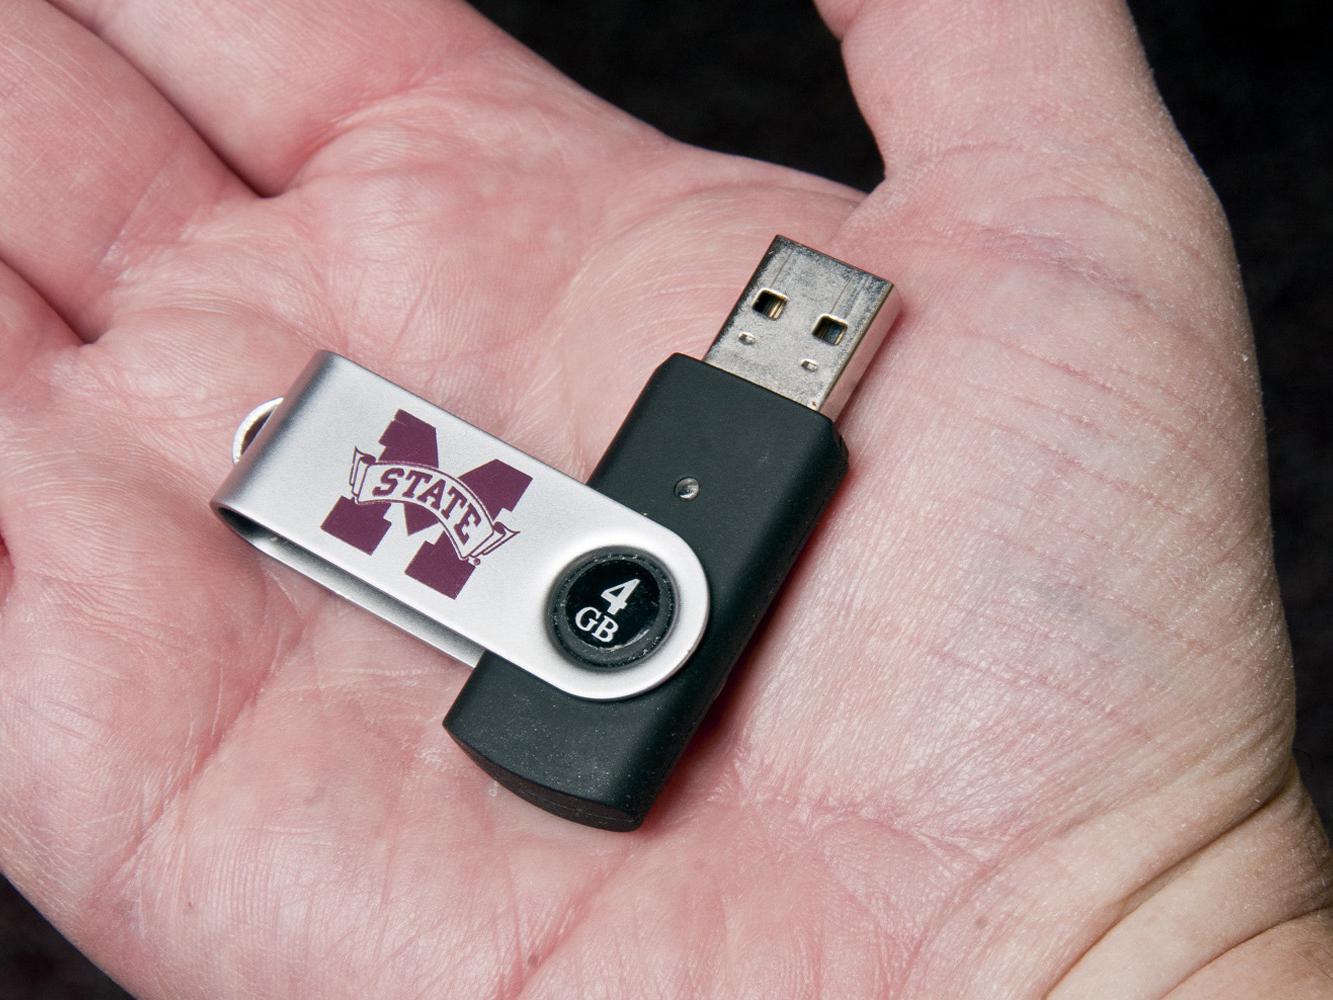 A USB (universal serial bus) flash drive is a small device that fits in a palm. It allows for the rapid transfer of data from the computer to the flash drive and from the flash drive to the computer. A 4GB USB flash drive costs less than $10.  (Photo by Scott Corey)